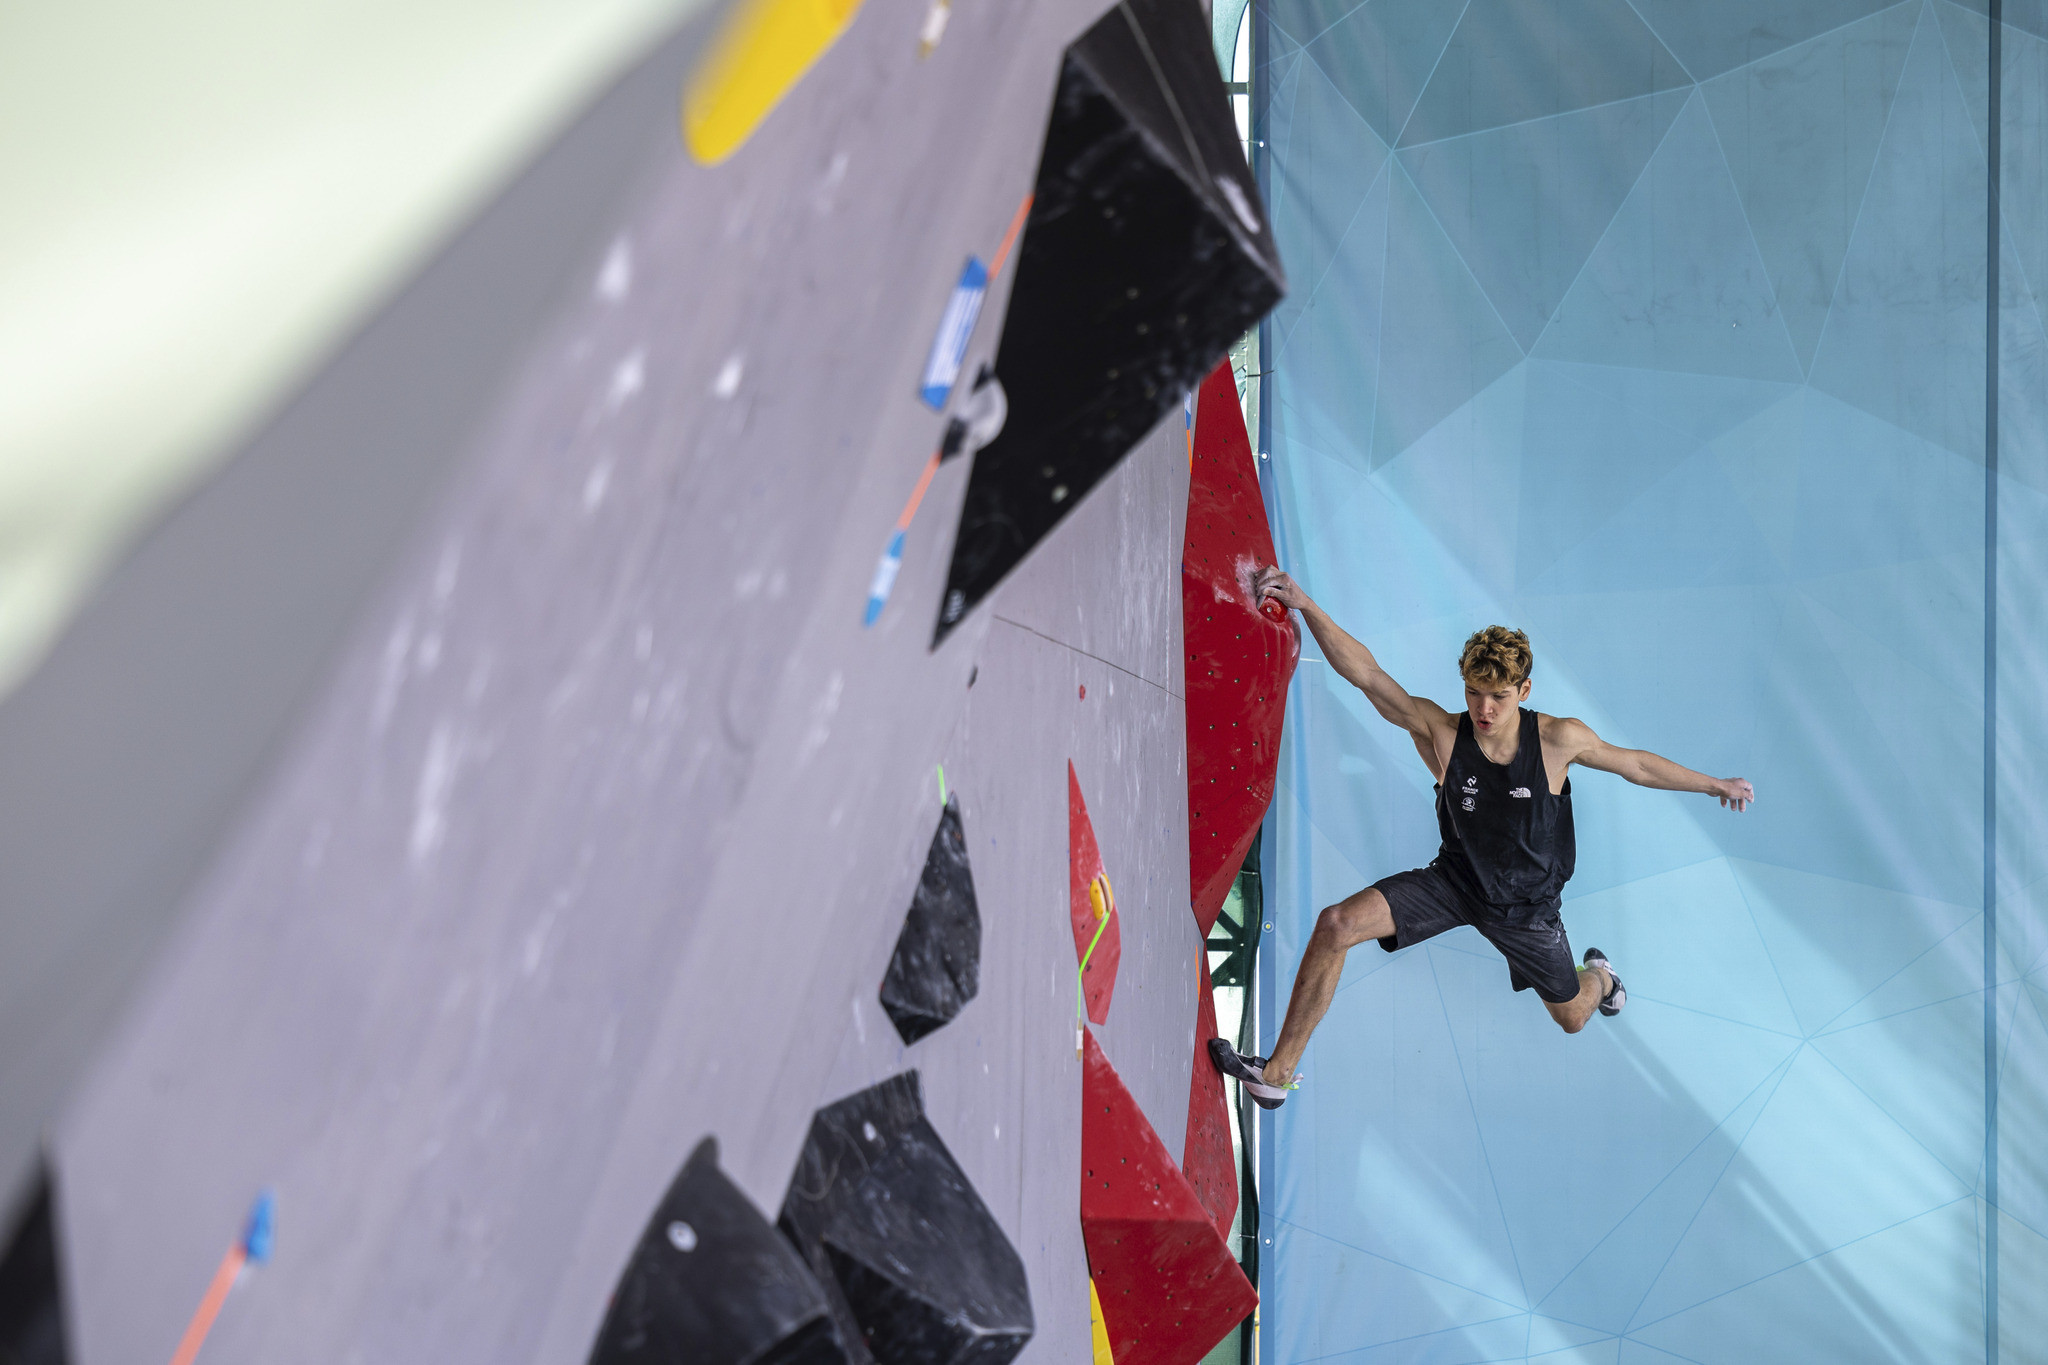 Sport climbing has been added to the programme for the second Neom Beach Games ©Neom Beach Games